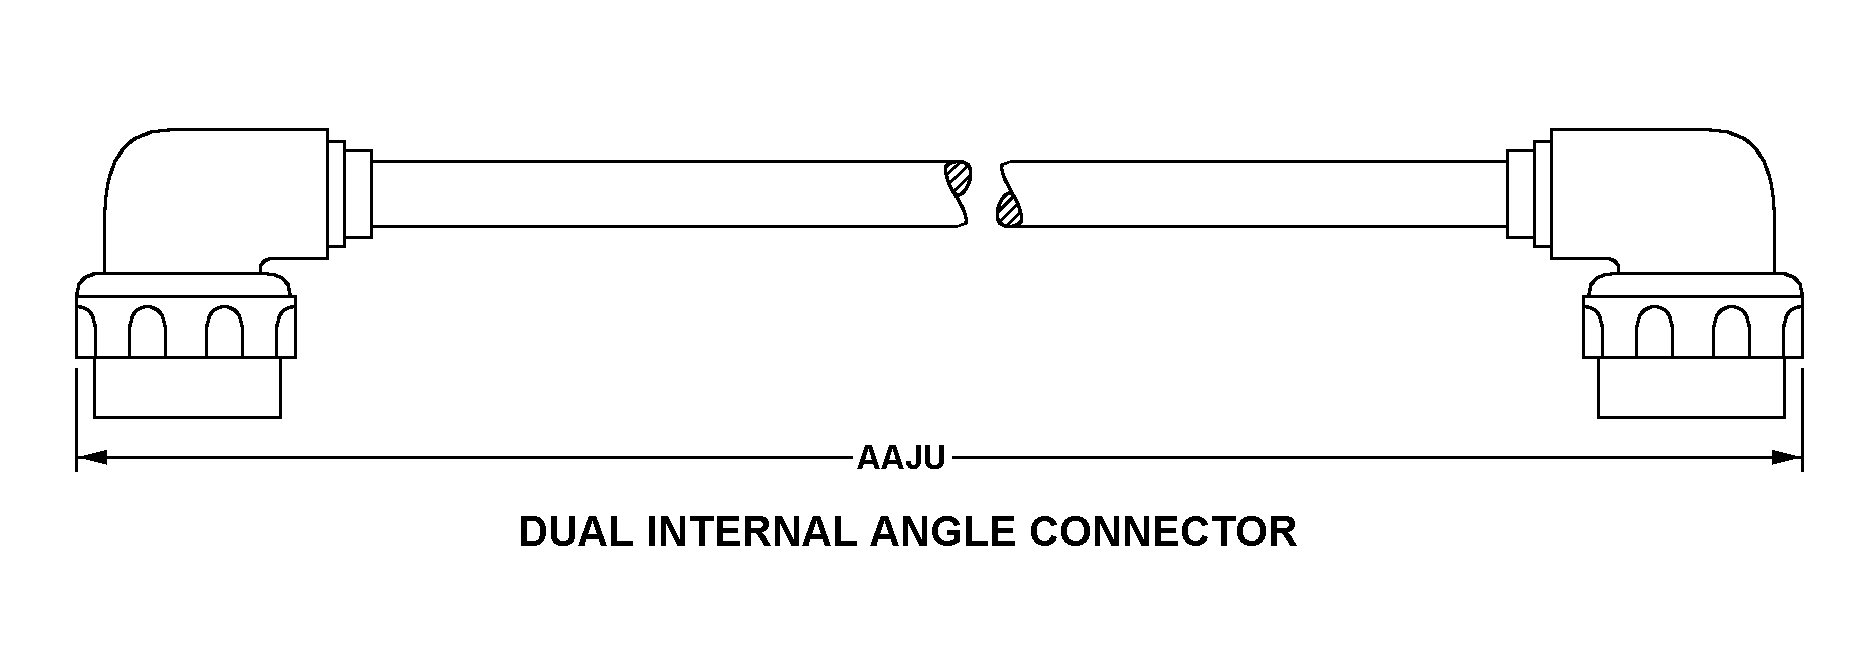 DUAL INTERNAL ANGLE CONNECTOR style nsn 6150-01-149-9895